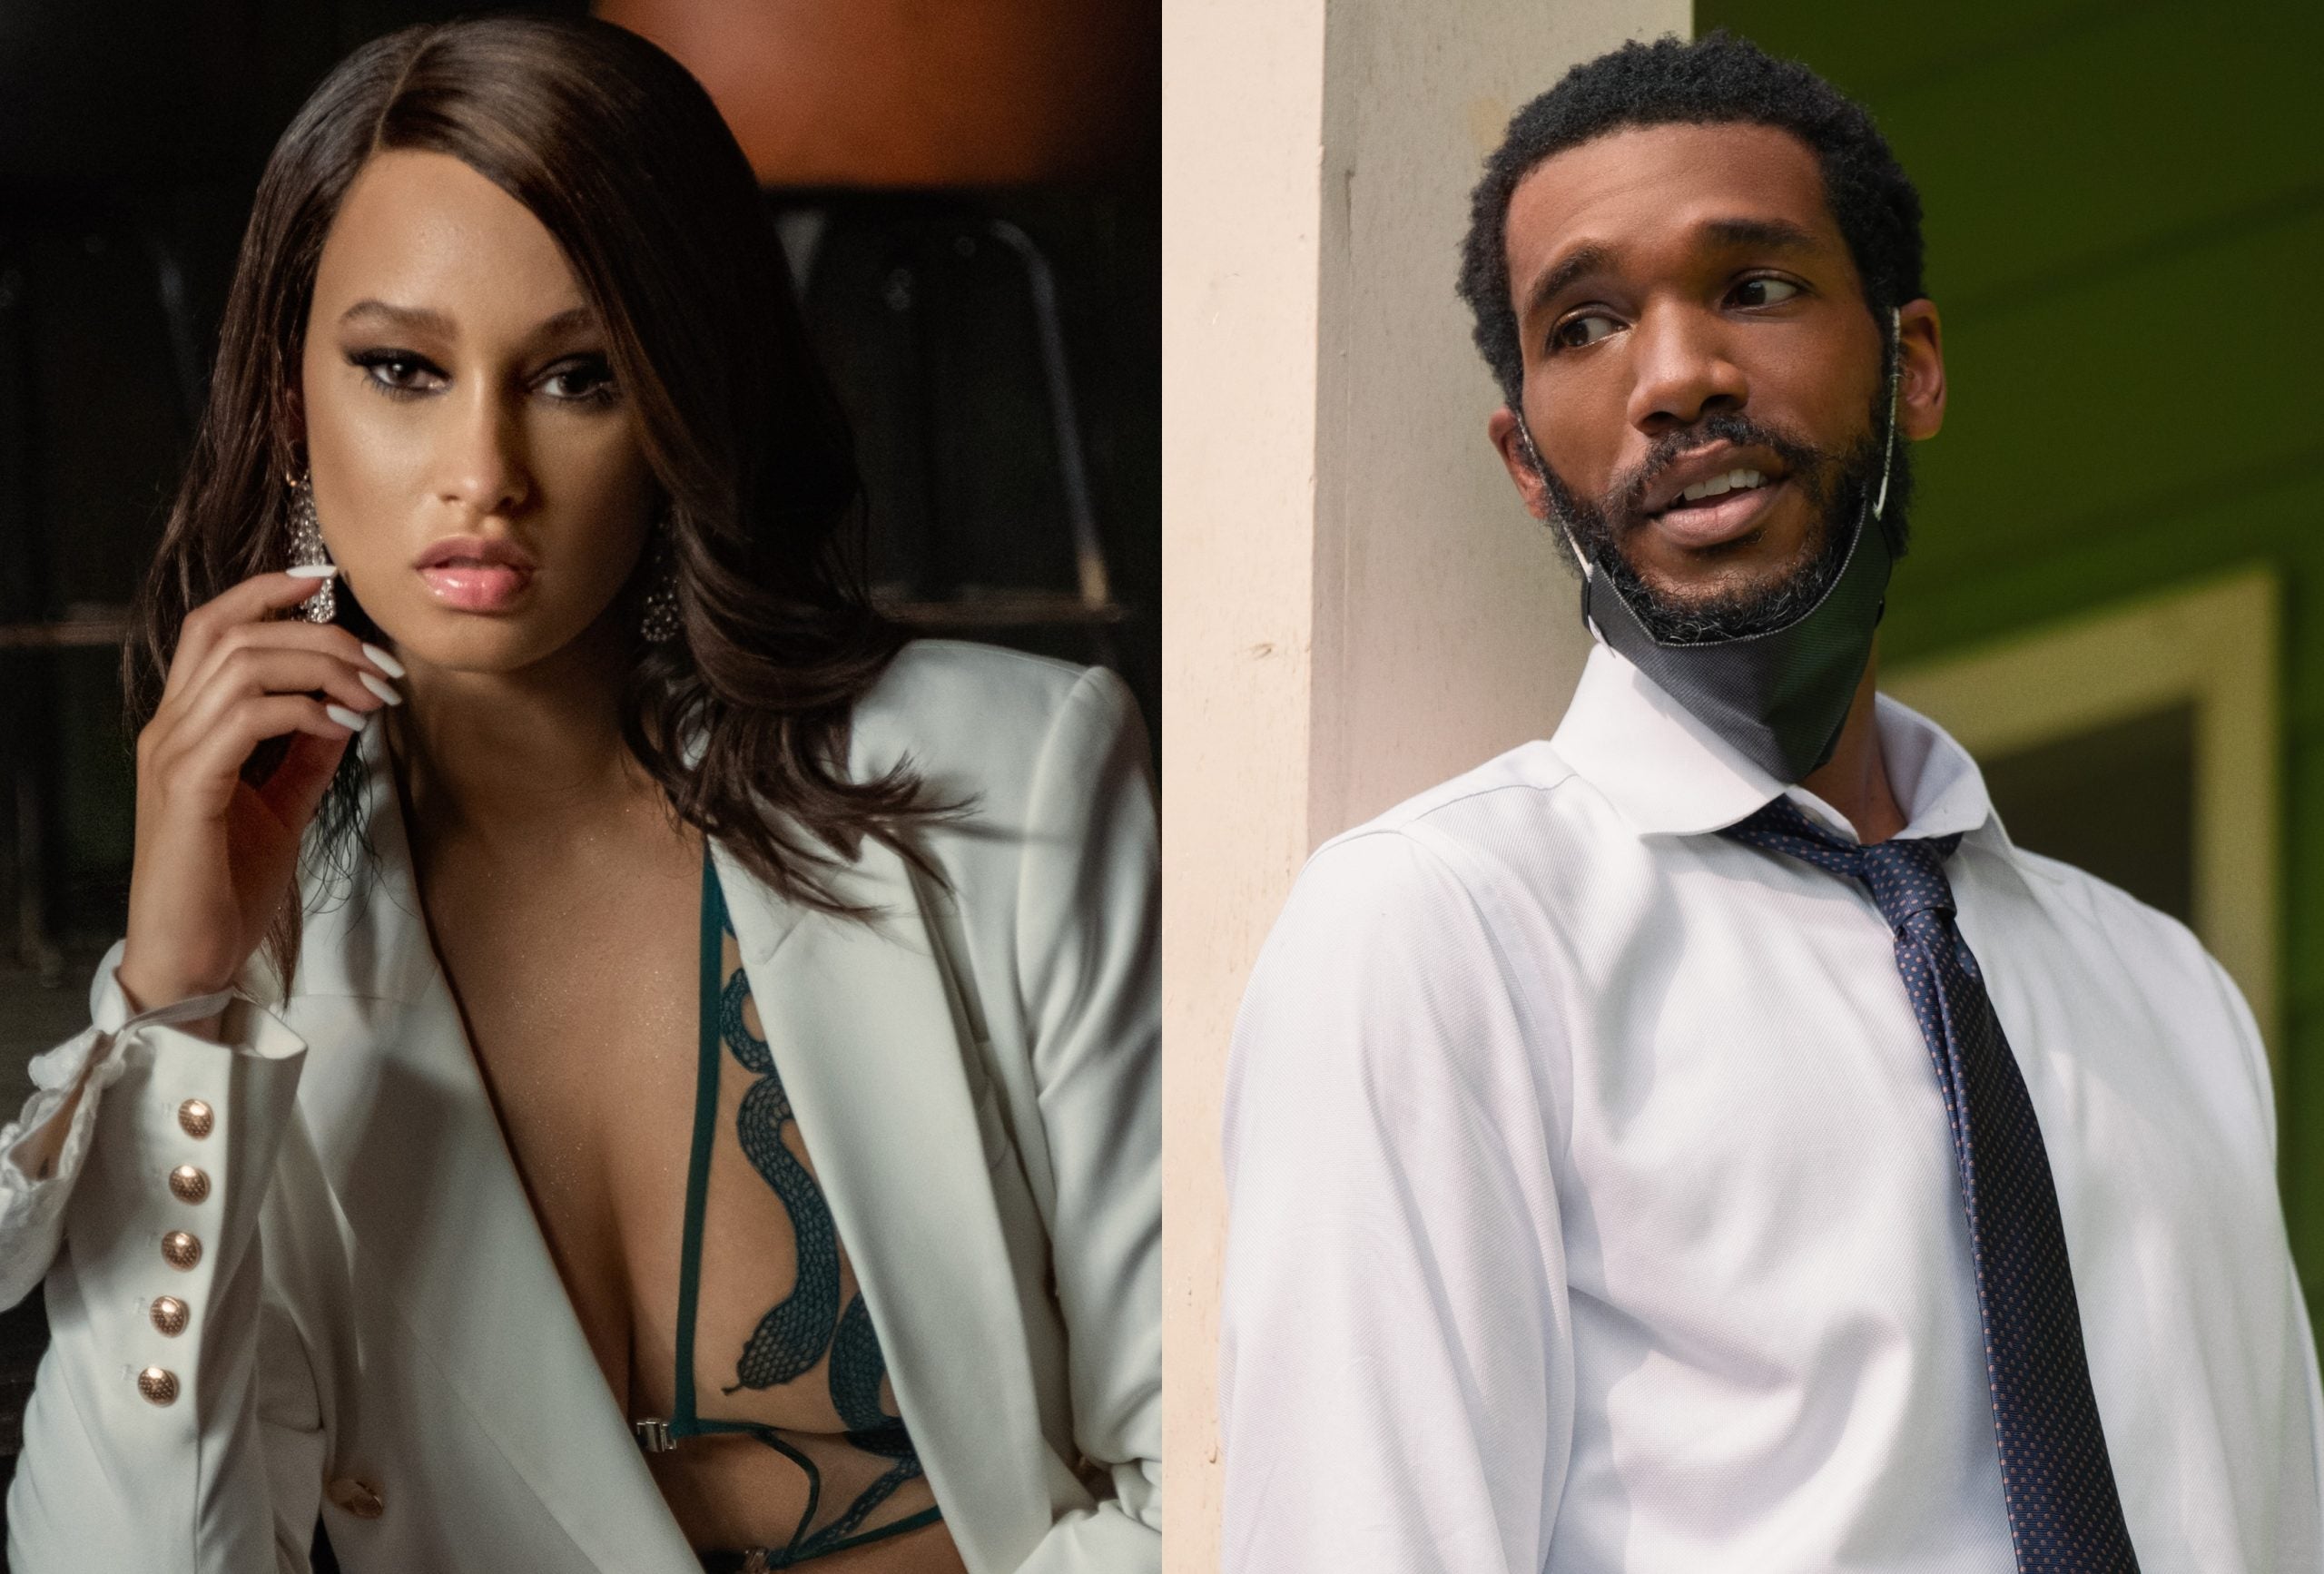 Elarica Johnson, Parker Sawyers Reveal What's Next For Hailey and Andre On 'P-Valley' Season 2